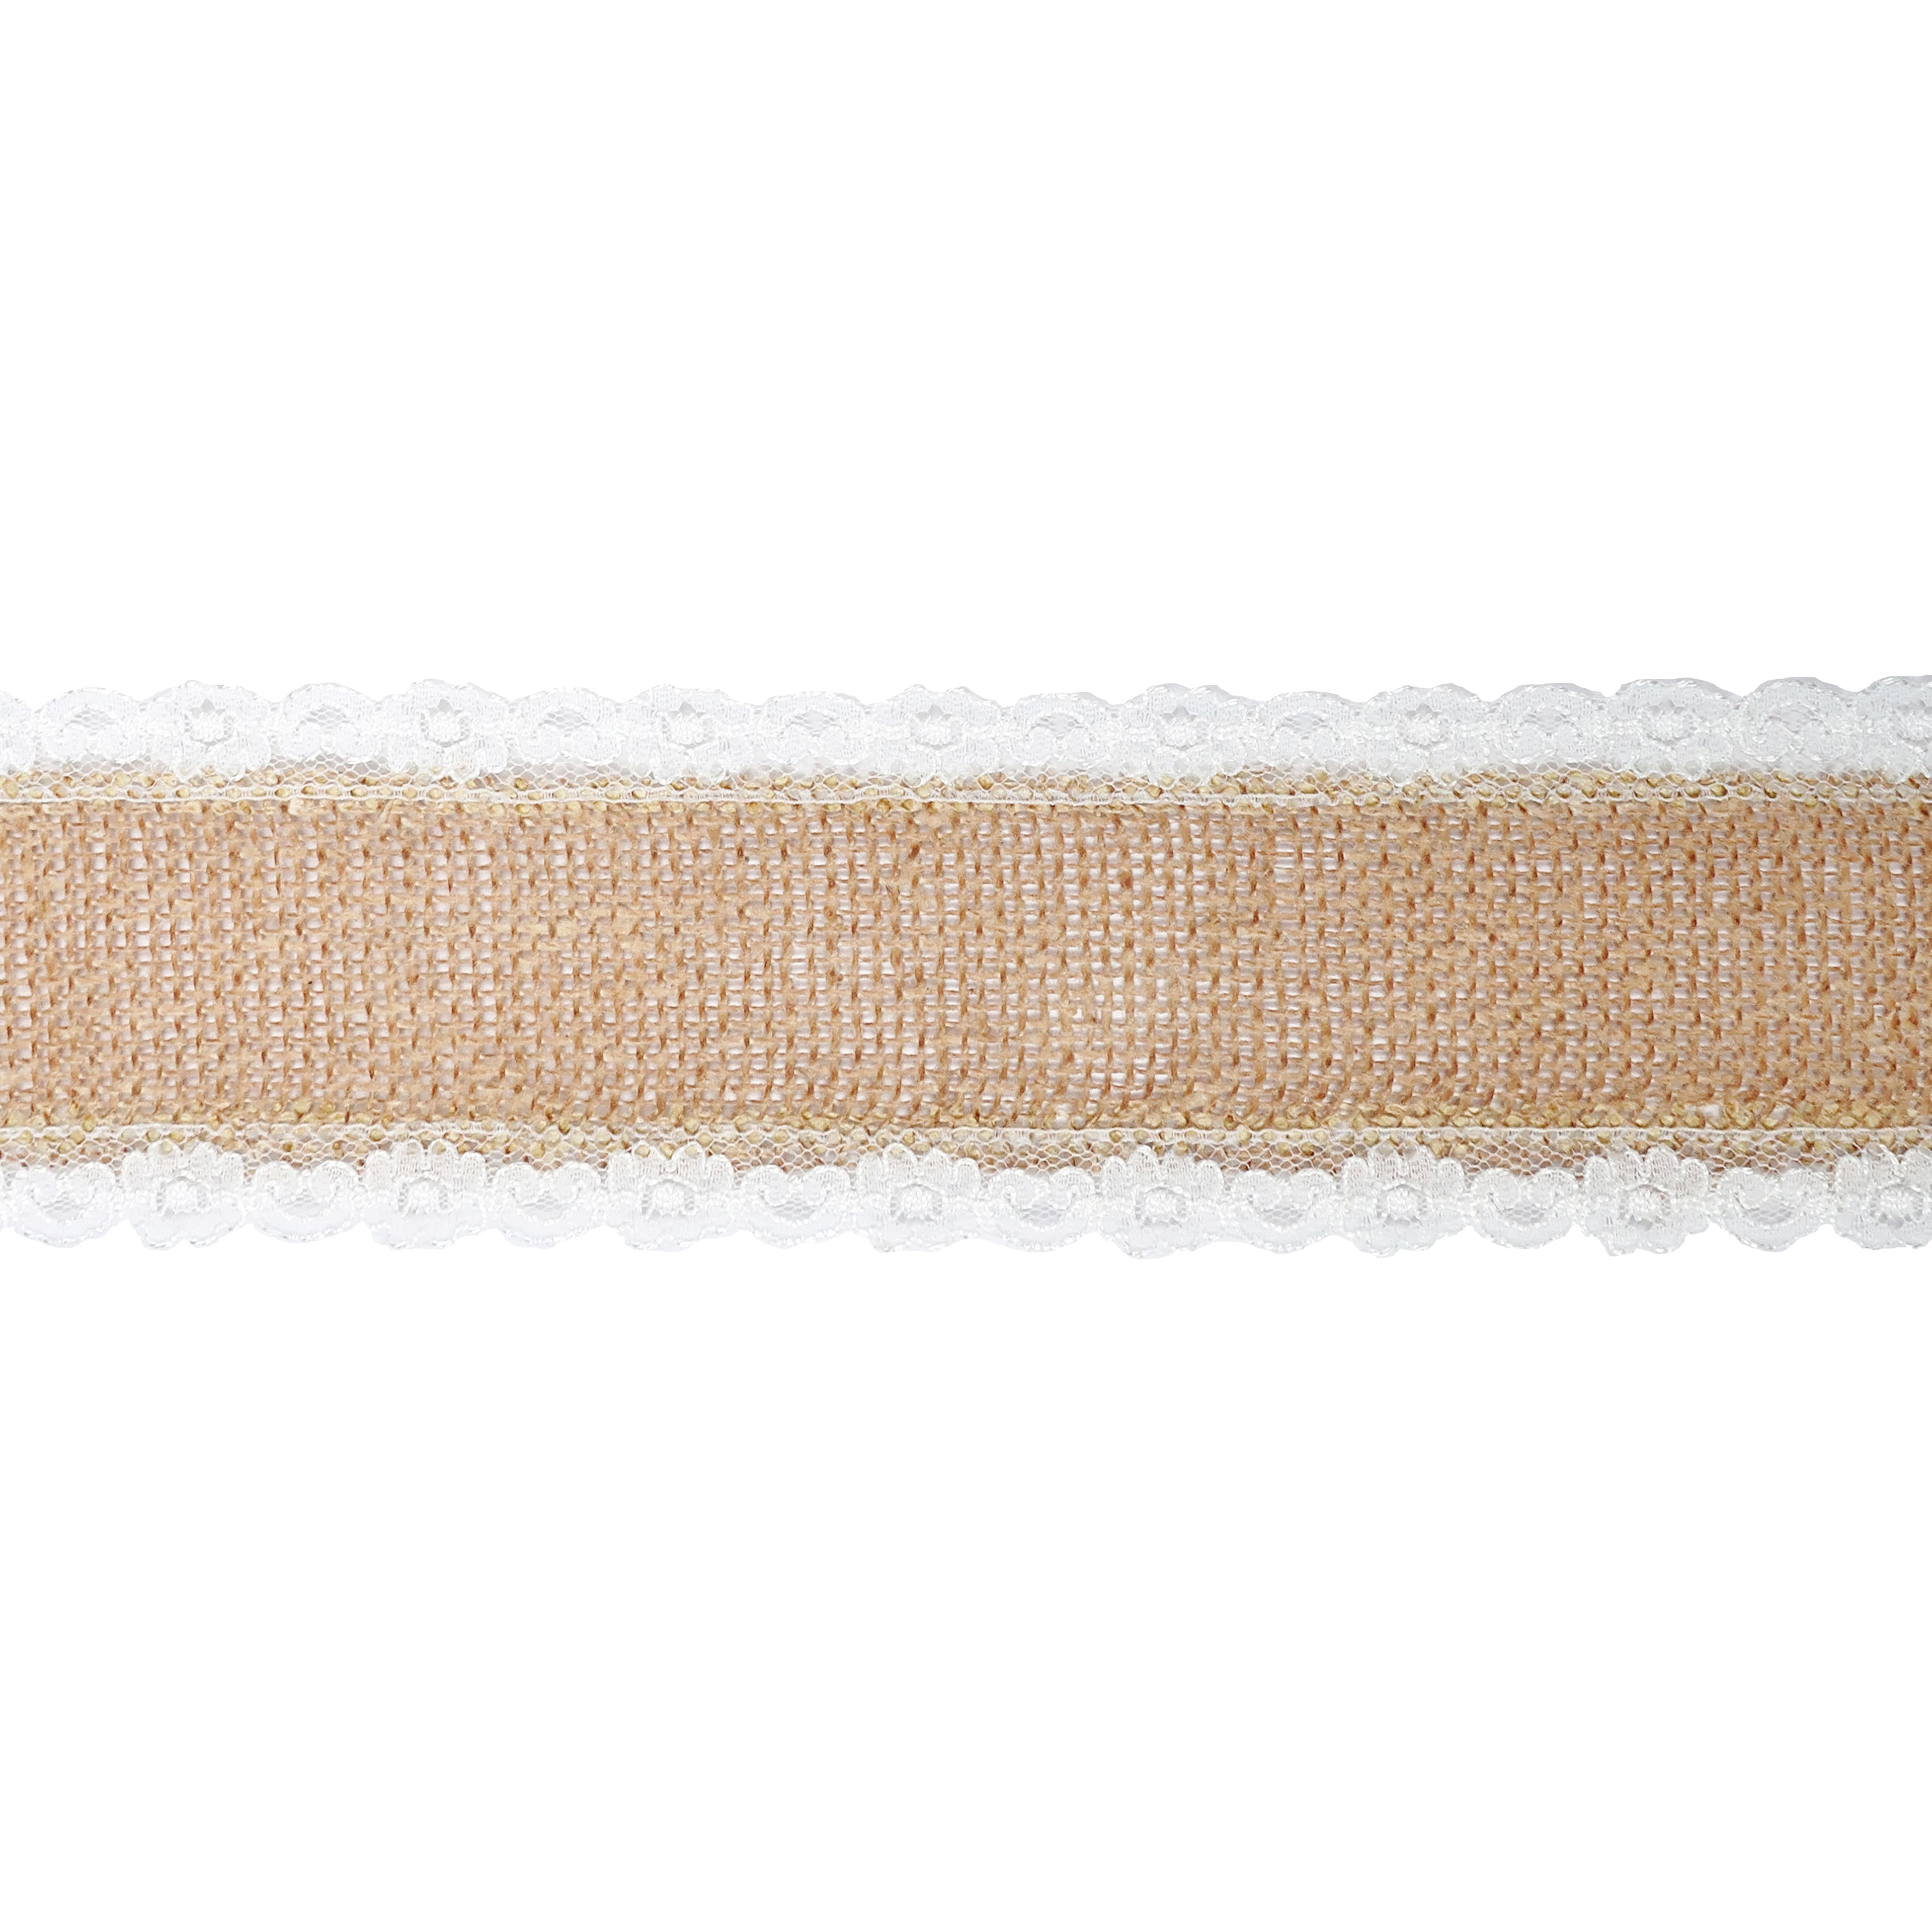 12 Pack: 2.5 inch Burlap Frayed Ribbon by Celebrate It Occasions, Size: 2.5 x 3yd, Beige